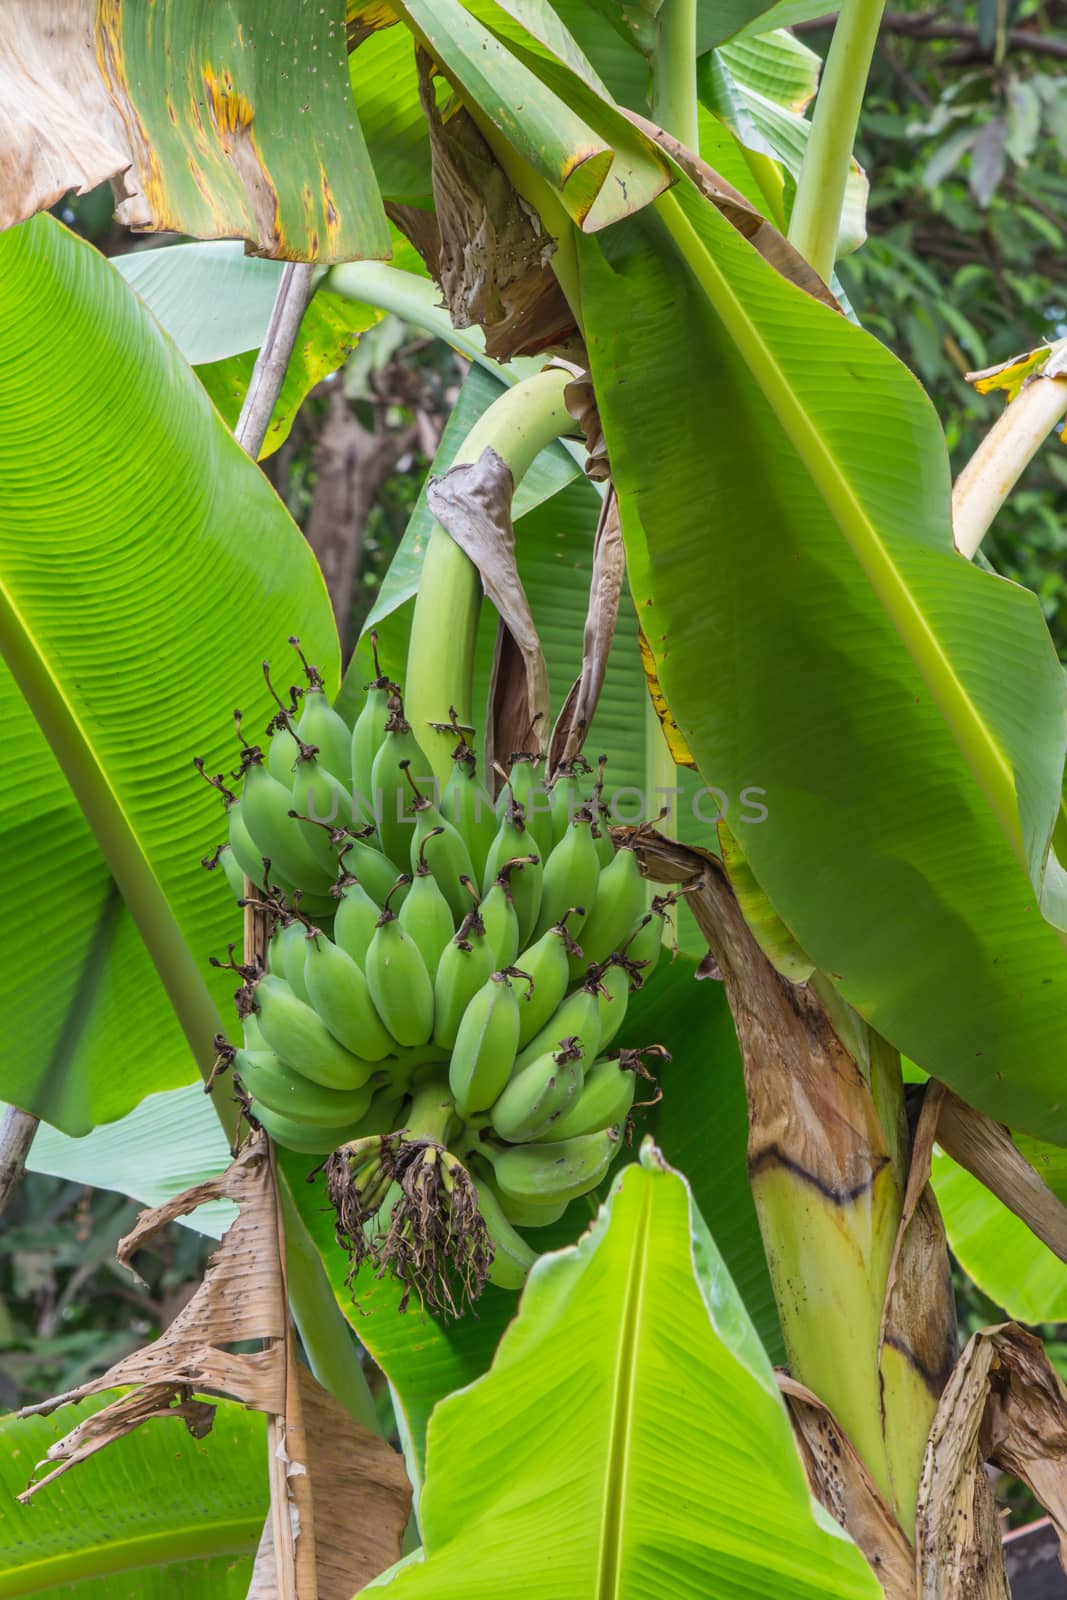 A Banana tree with a bunch of green bananas by peerapixs